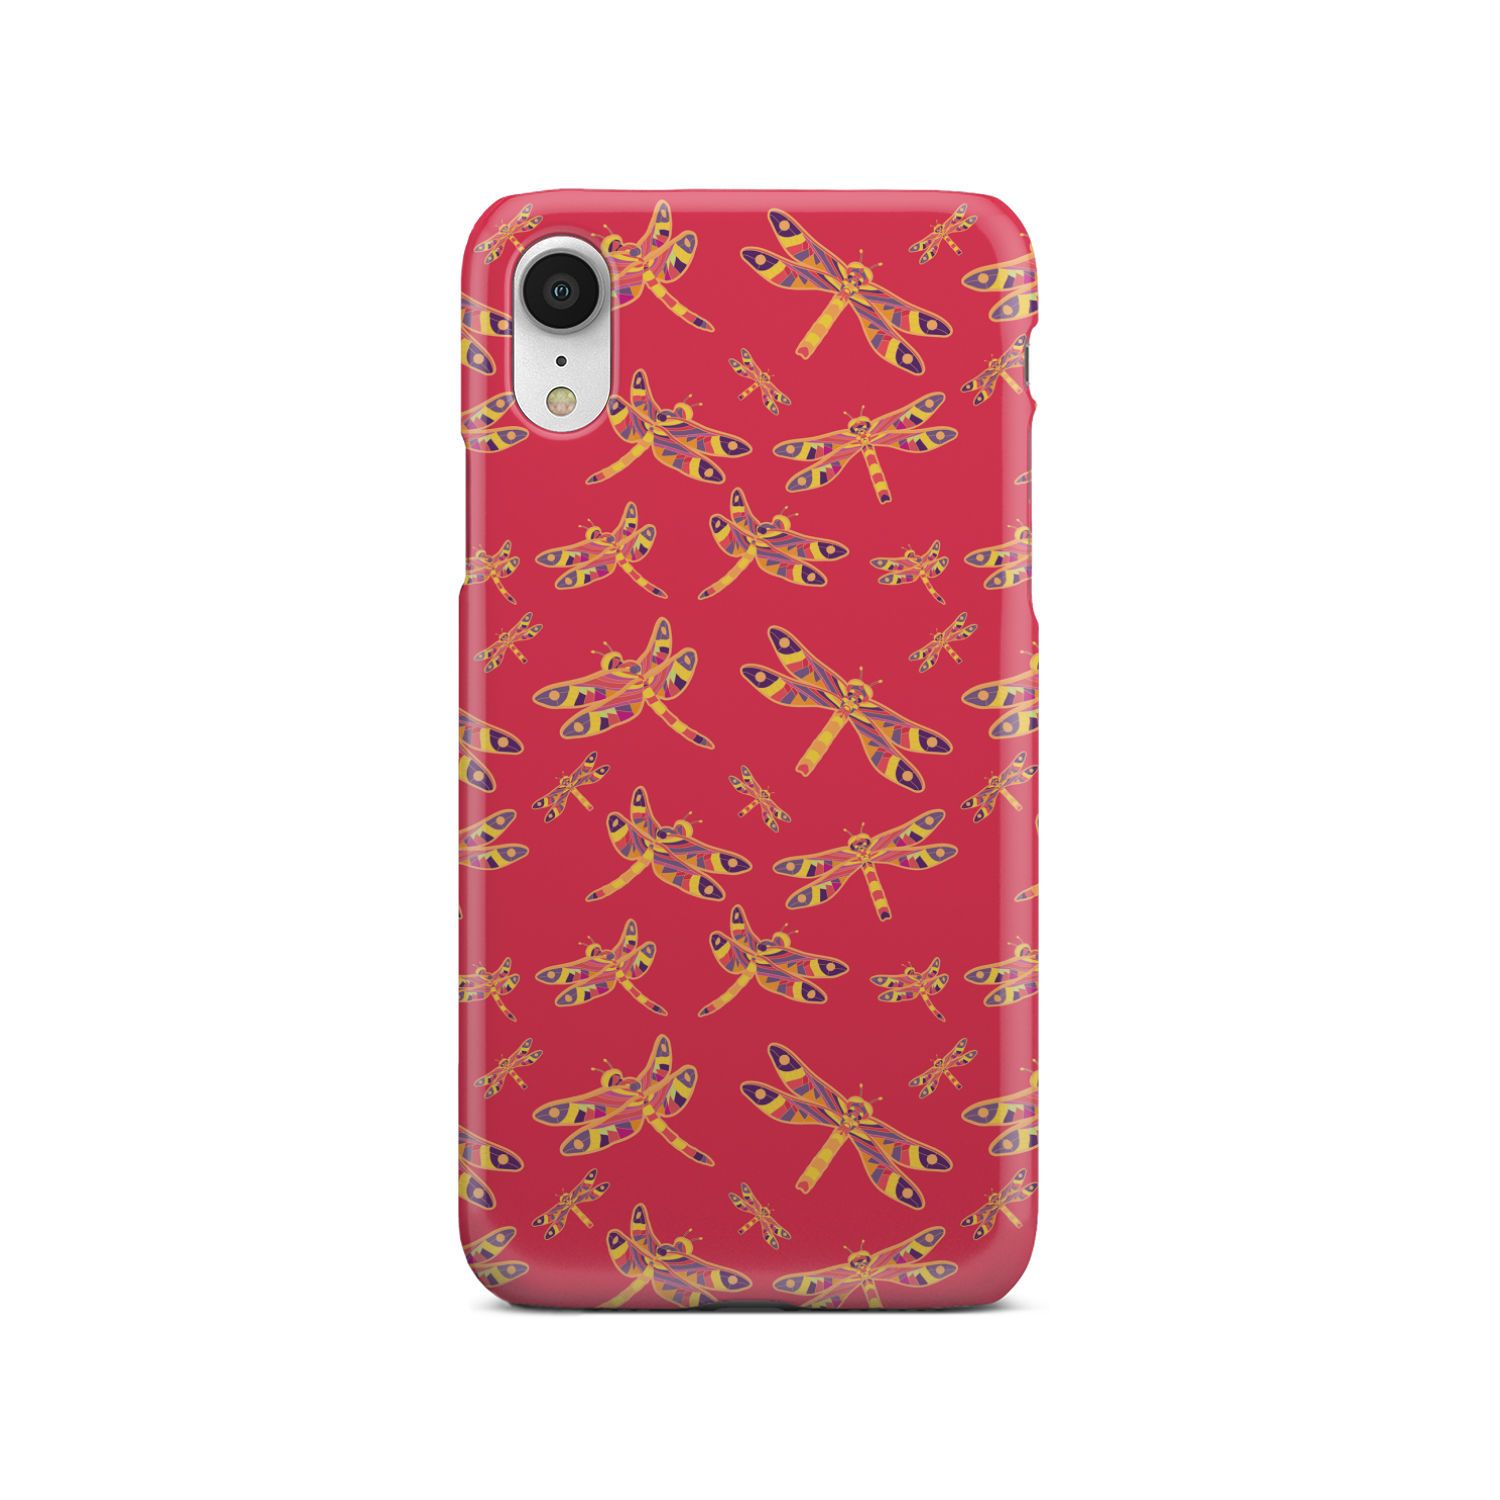 Gathering Rouge Phone Case Phone Case wc-fulfillment iPhone Xr 